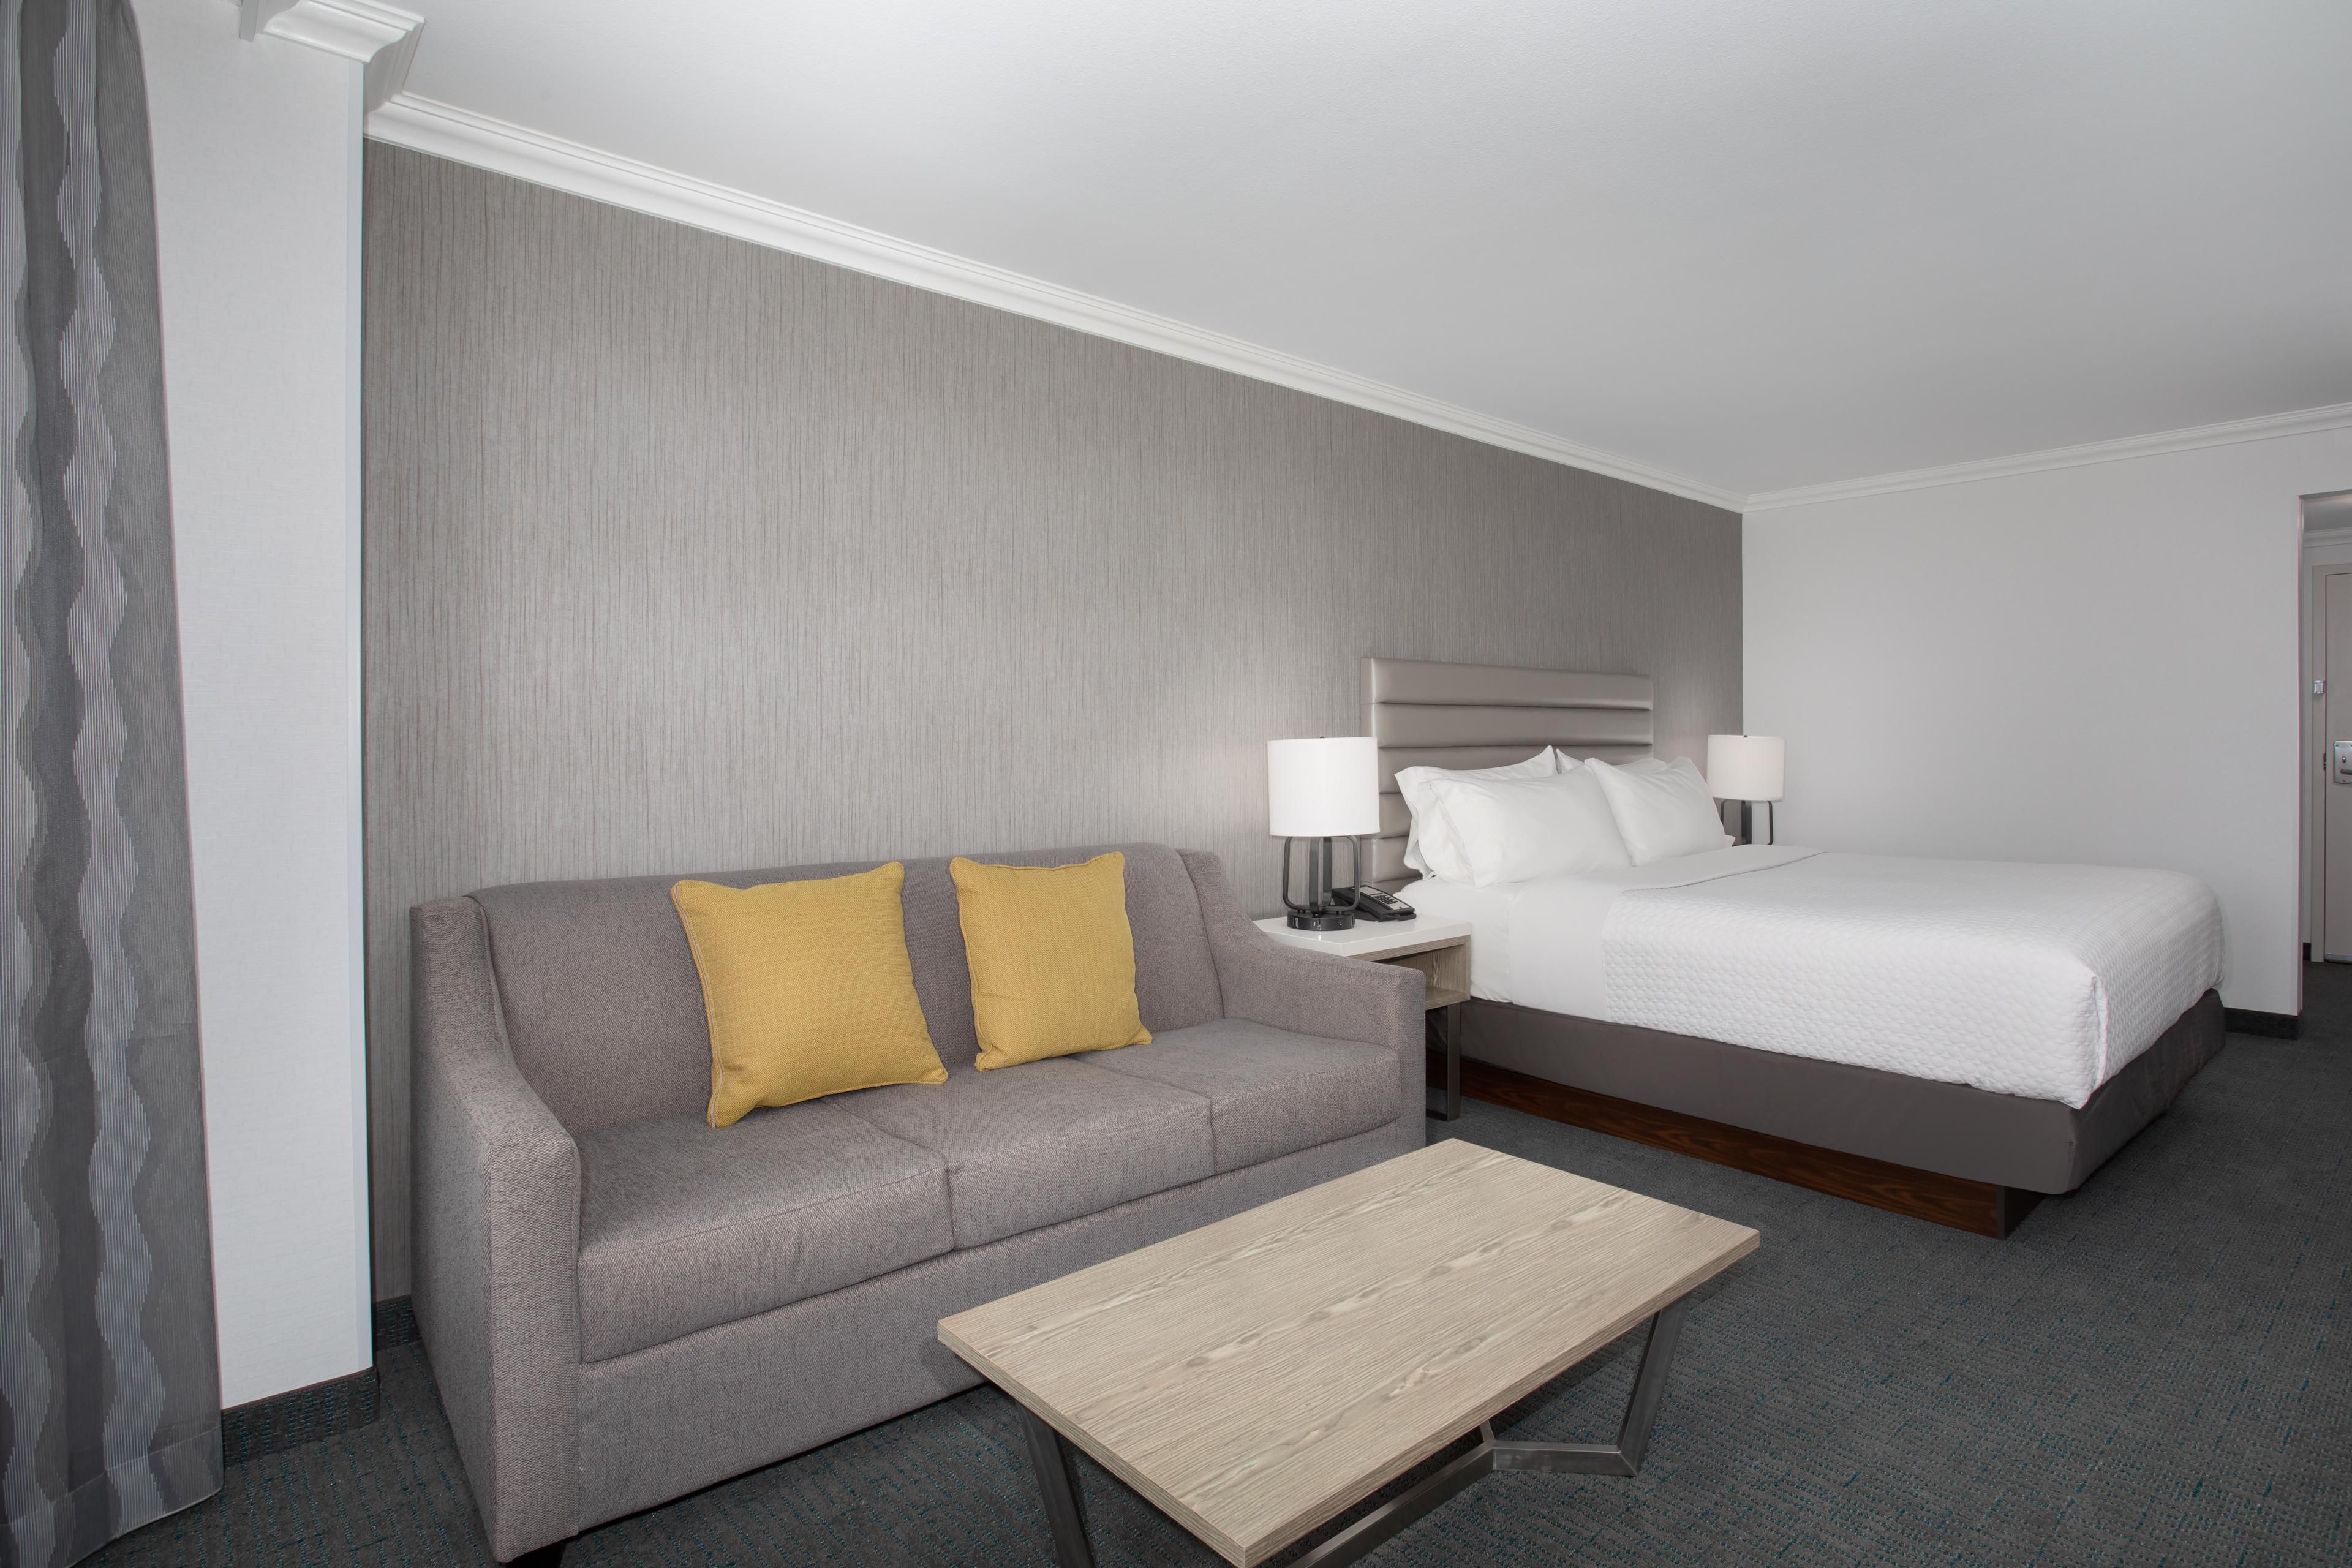 At the end of a long day, relax in our clean, fresh guest rooms. 